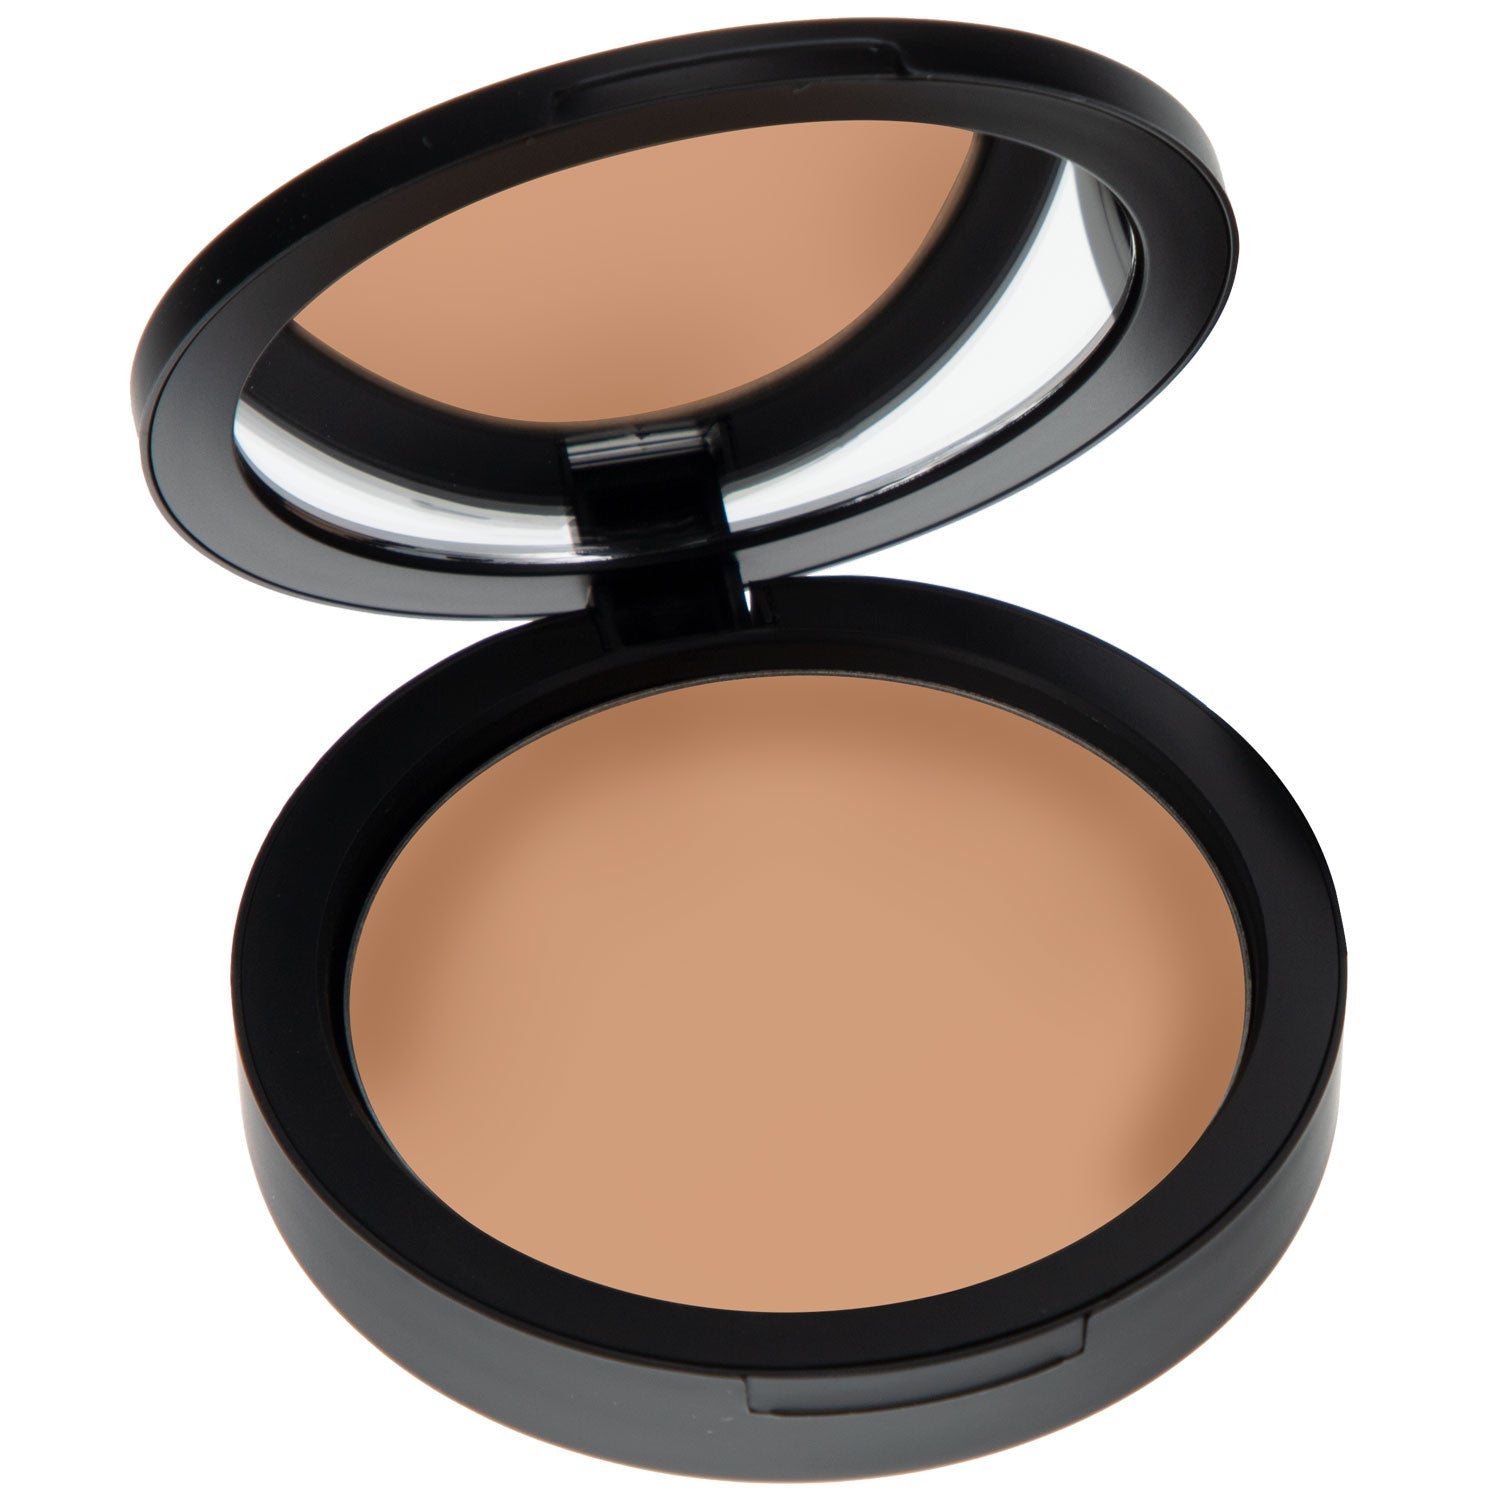 Mineral Based 4-in-1 Product is your PRESSED Powder, Foundation, SPF 15 and Soft Focus Finish All in One! No loose powder mess! Formulated without talc, gluten, phthalates, fragrance, GMO, parabens, or corn. CRAVING (Medium/Dark) - For tan to caramel complexions.